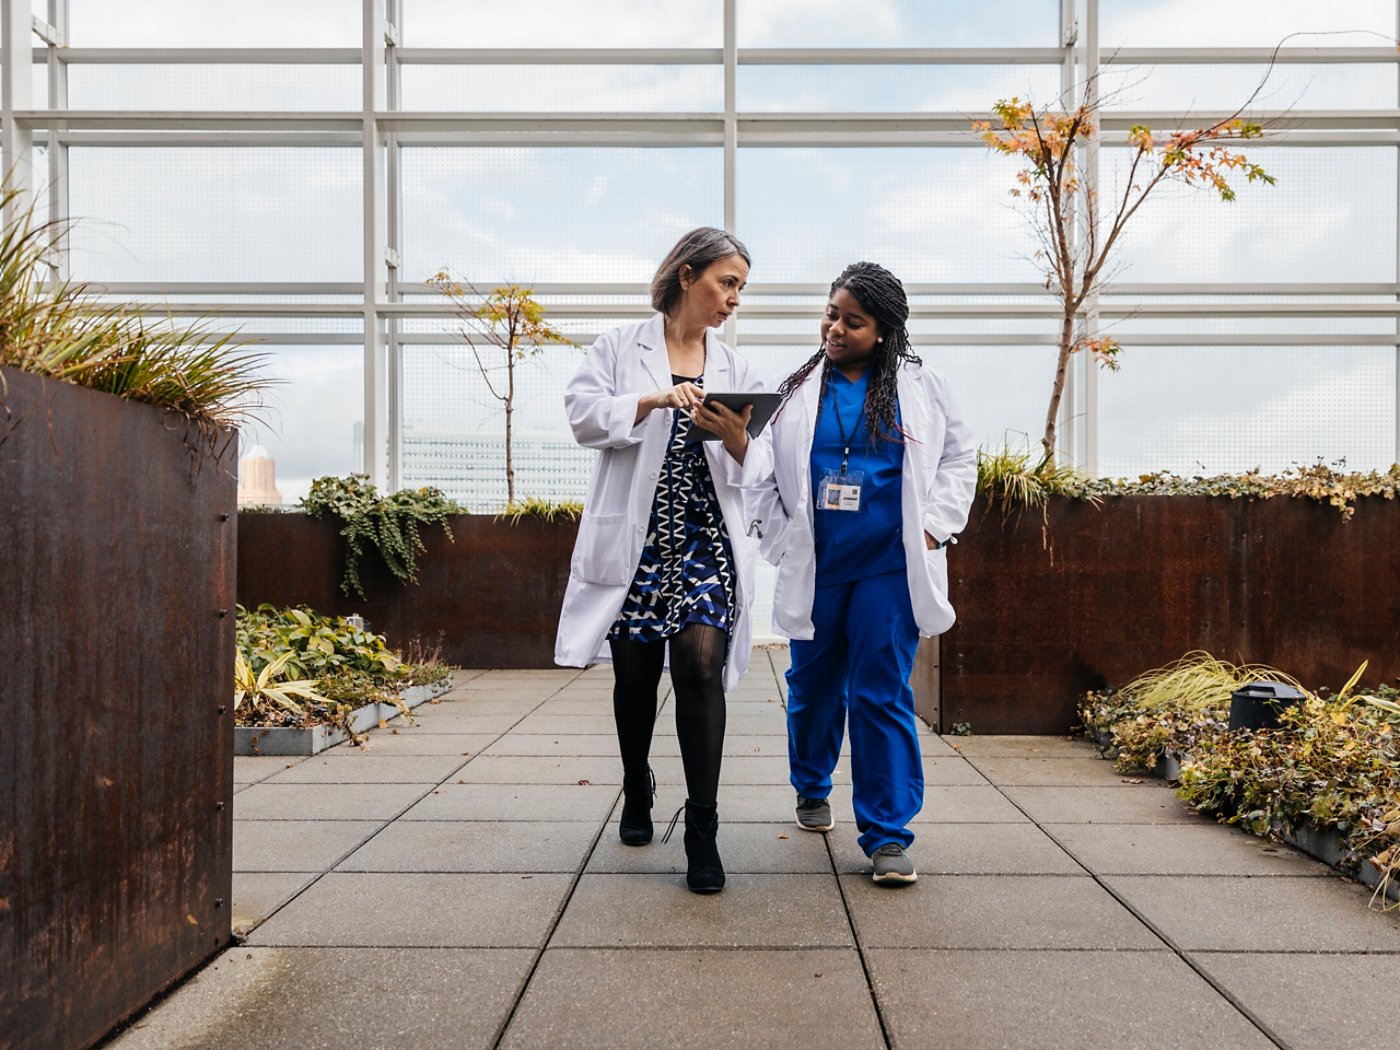 Two doctors walking on a rooftop terrace while looking at an tablet